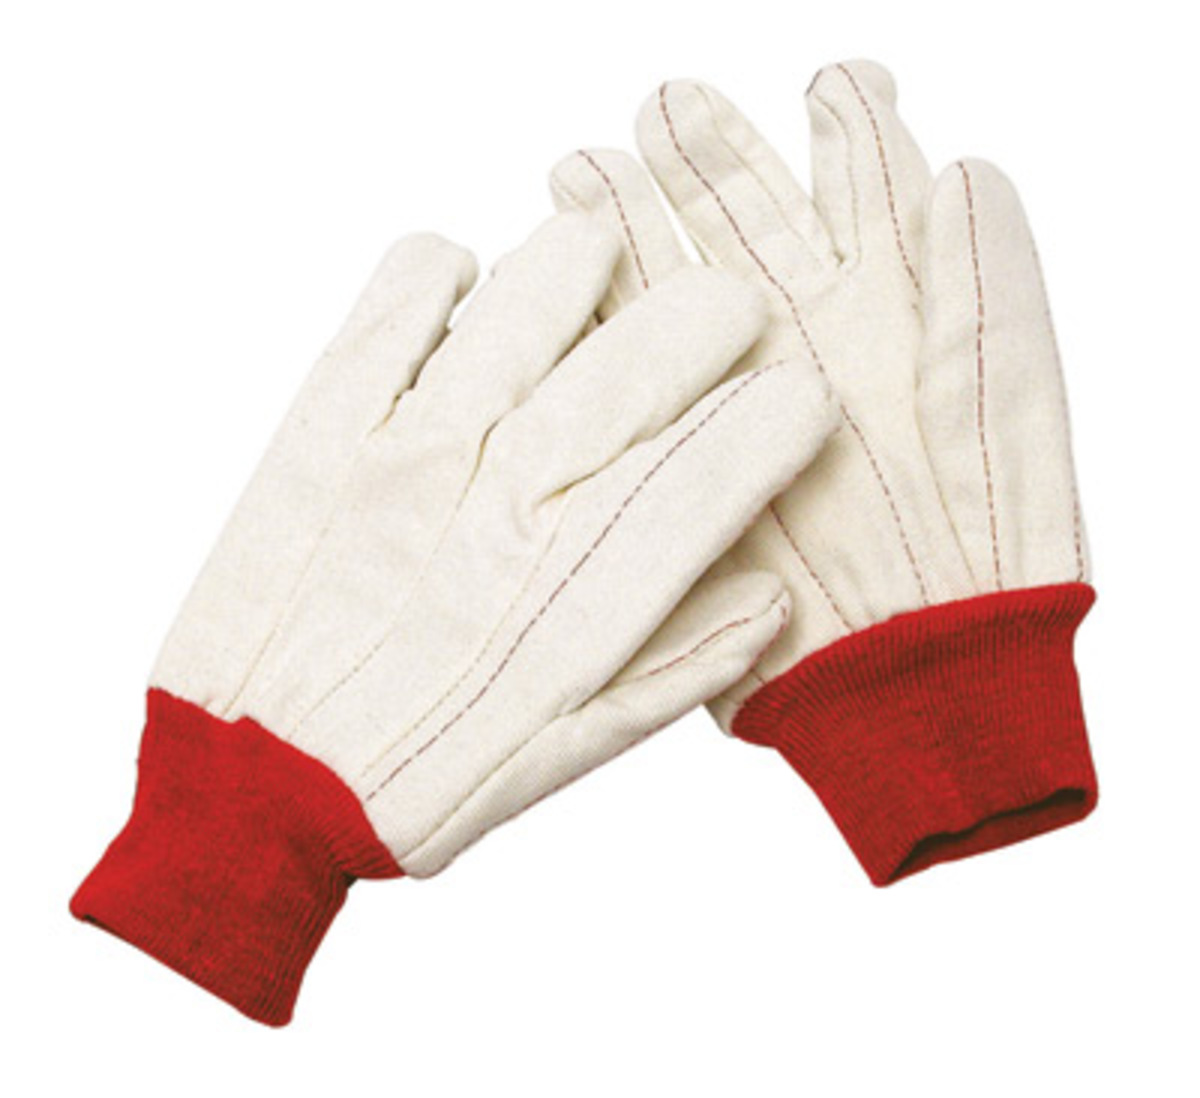 RADNOR® X-Large White 18 Ounce Canvas/Cotton/Polyester Hot Mill Gloves With Knit Wrist